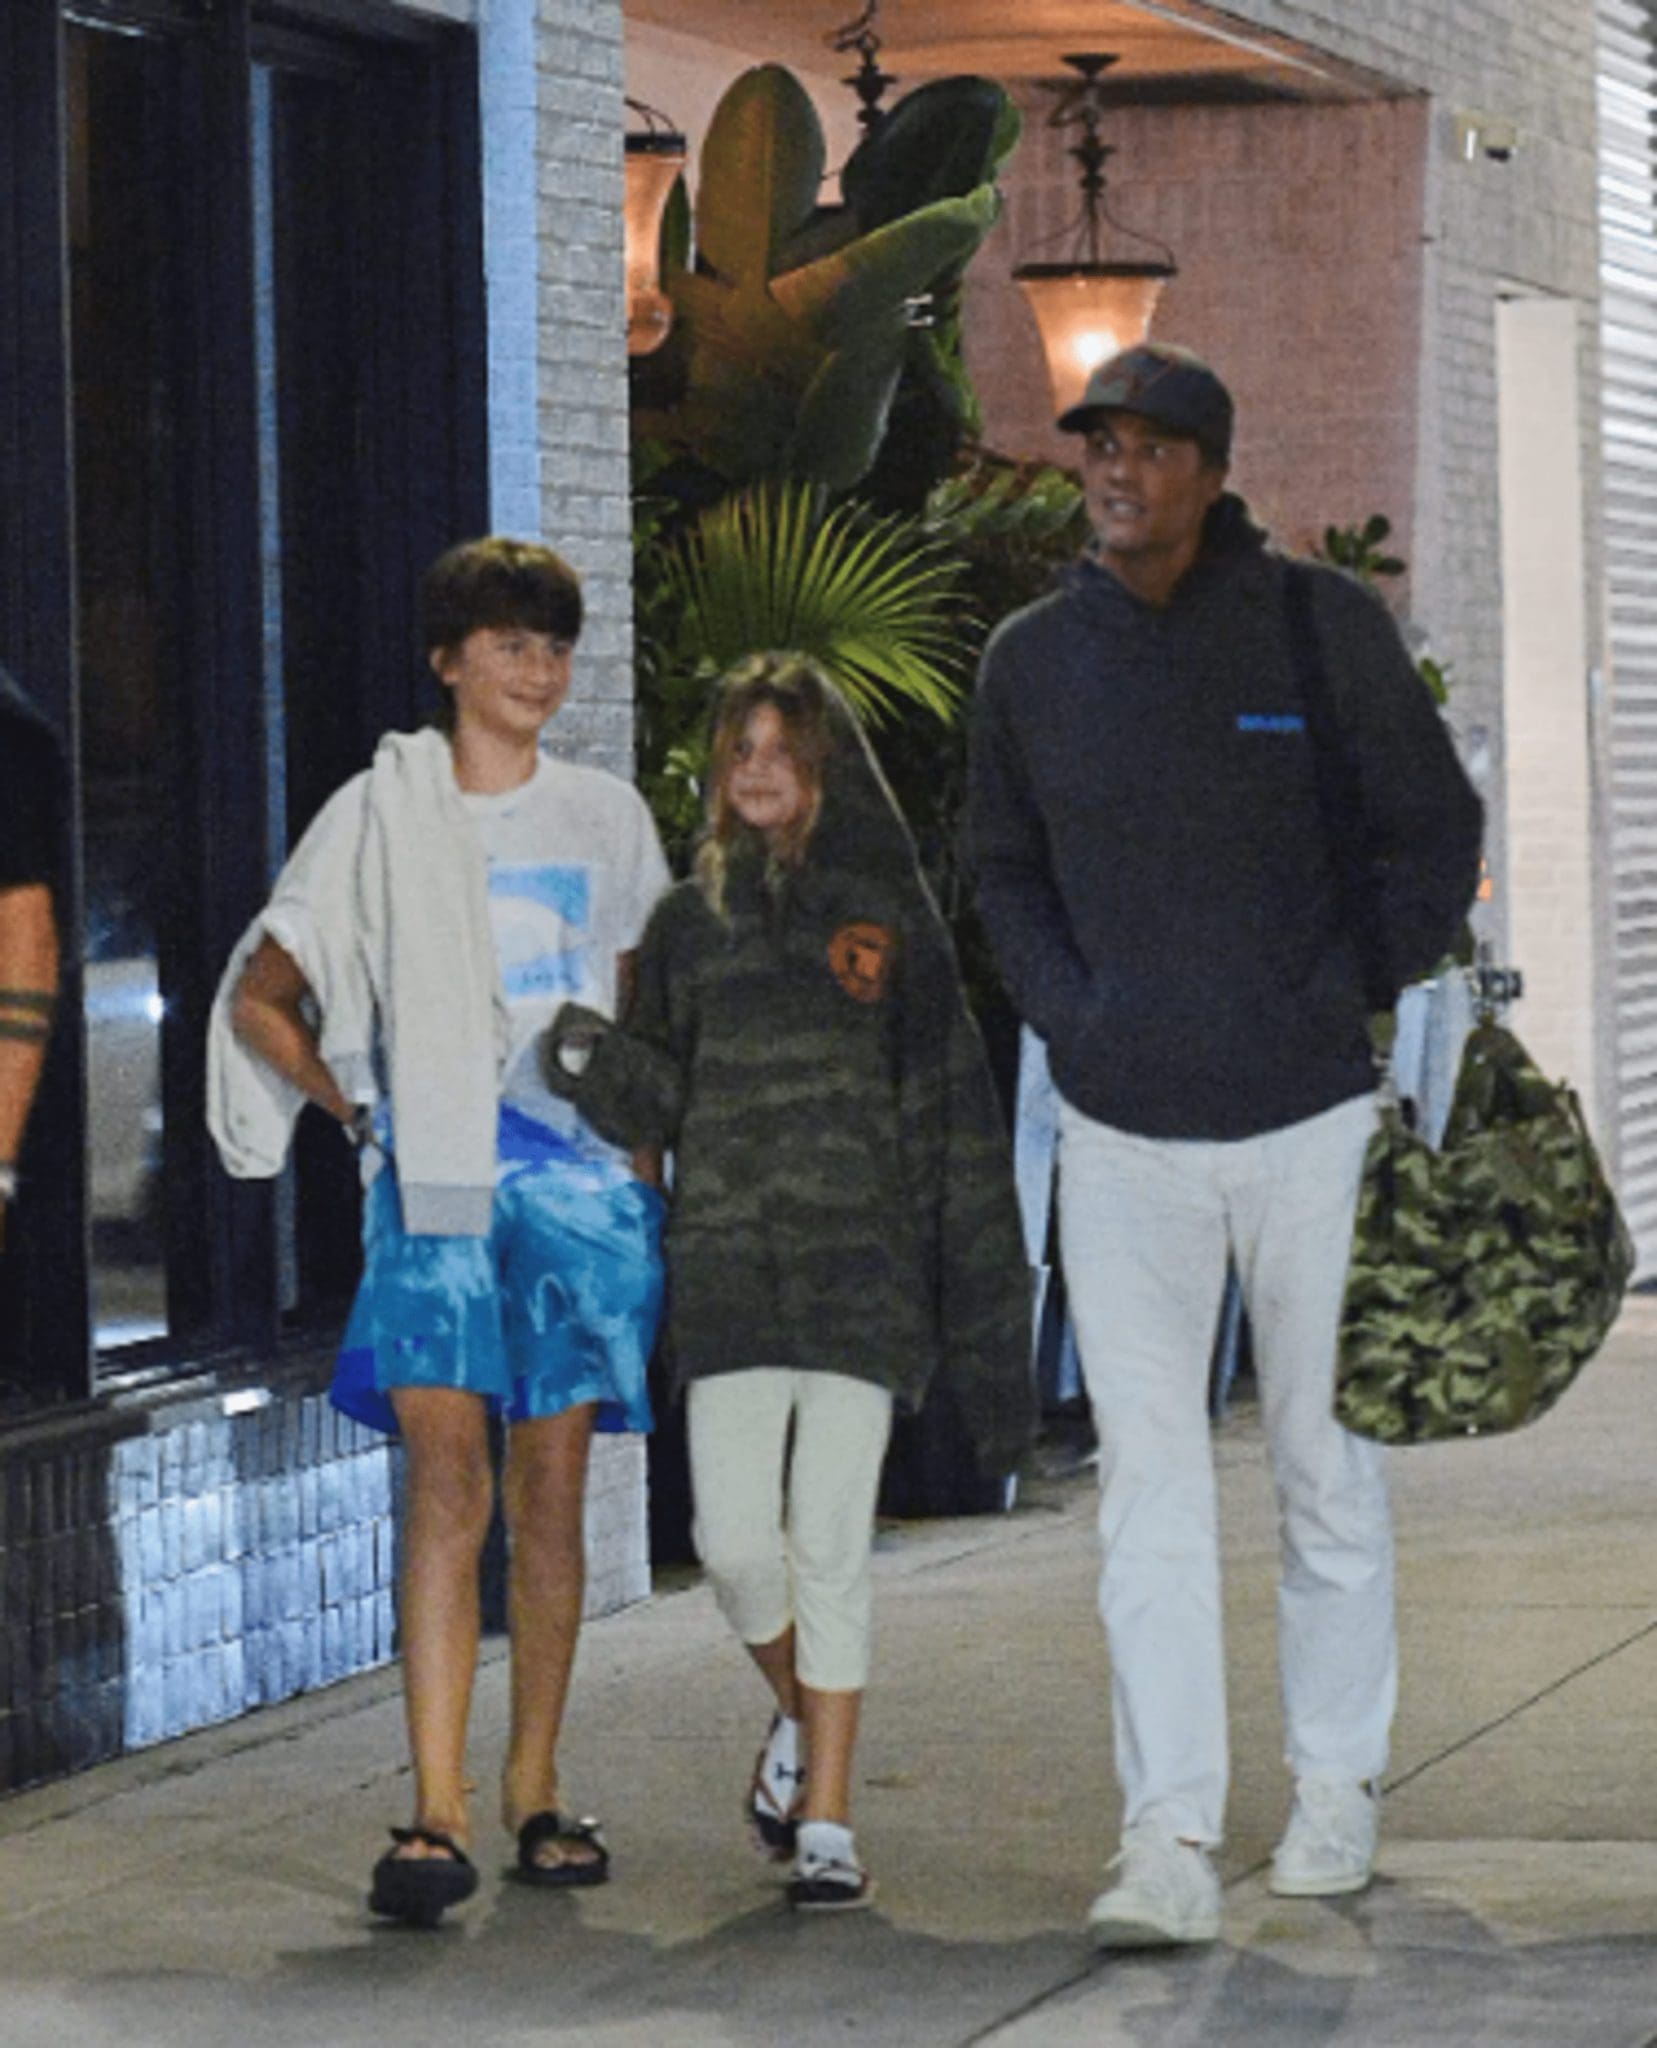 Having recently split from Gisele Bündchen, Tom Brady takes his children to the movies.